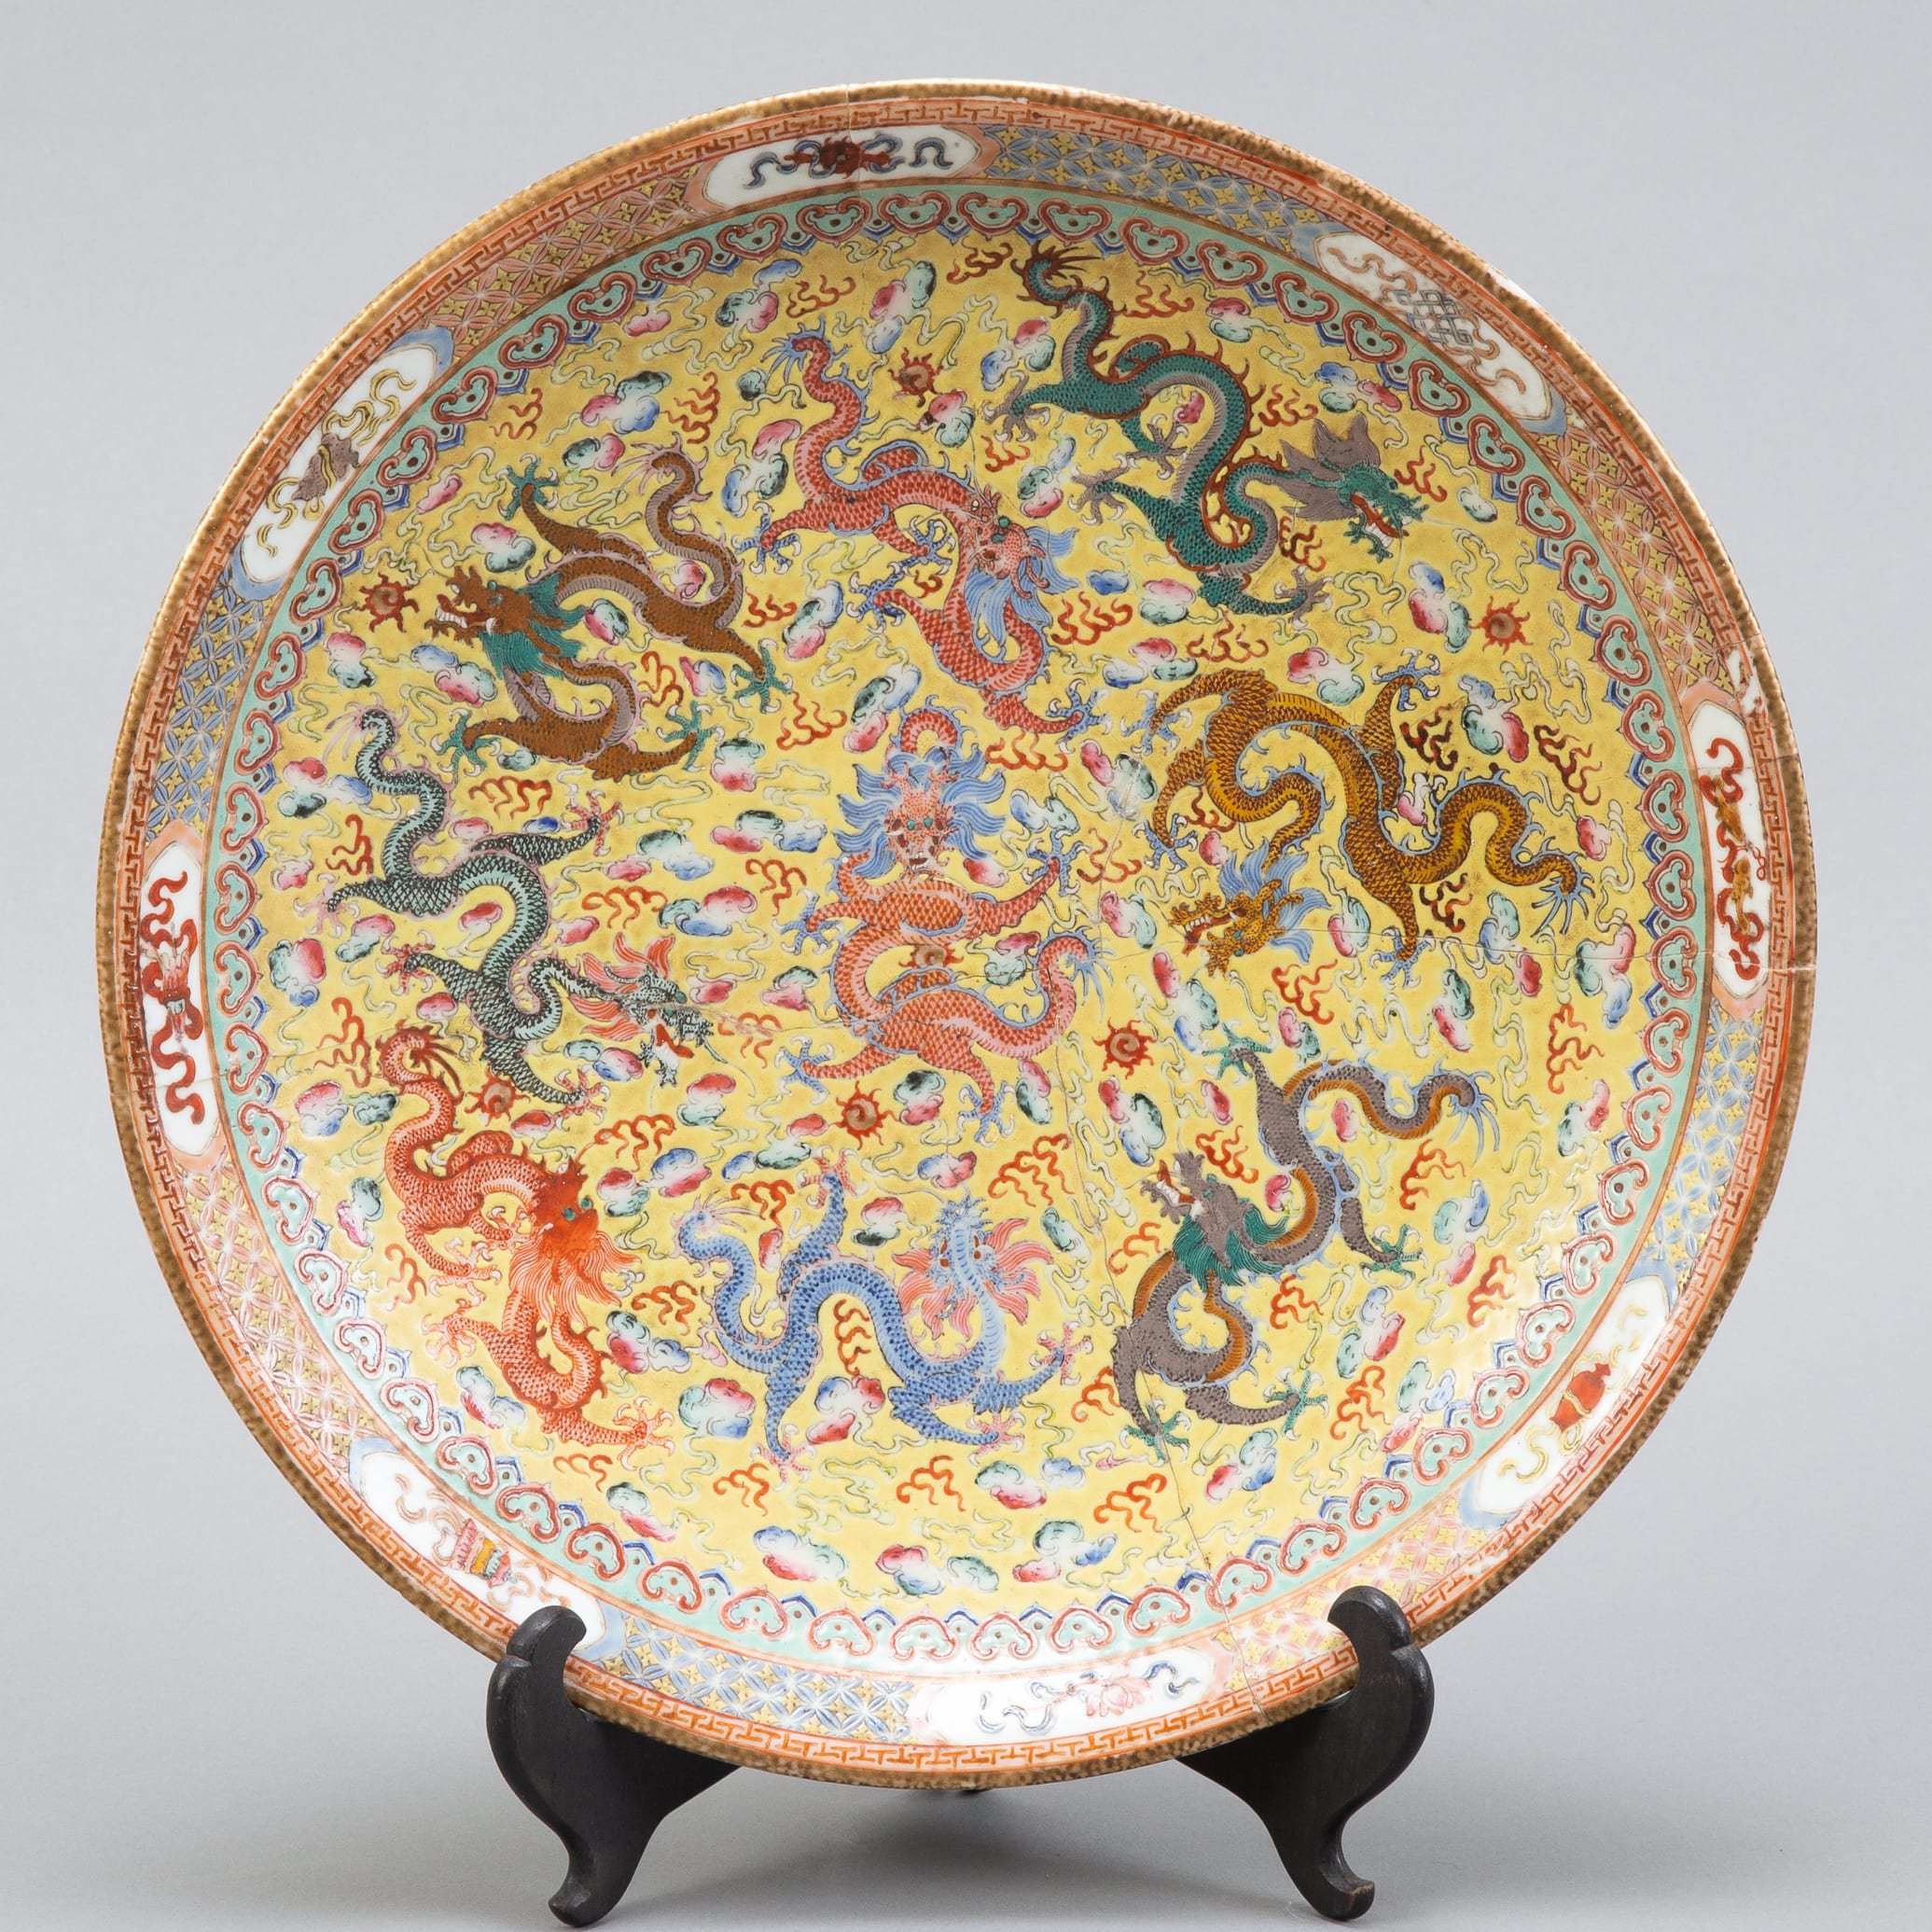 Lot 236: Early 20th c. Chinese Porcelain Dragon Charger